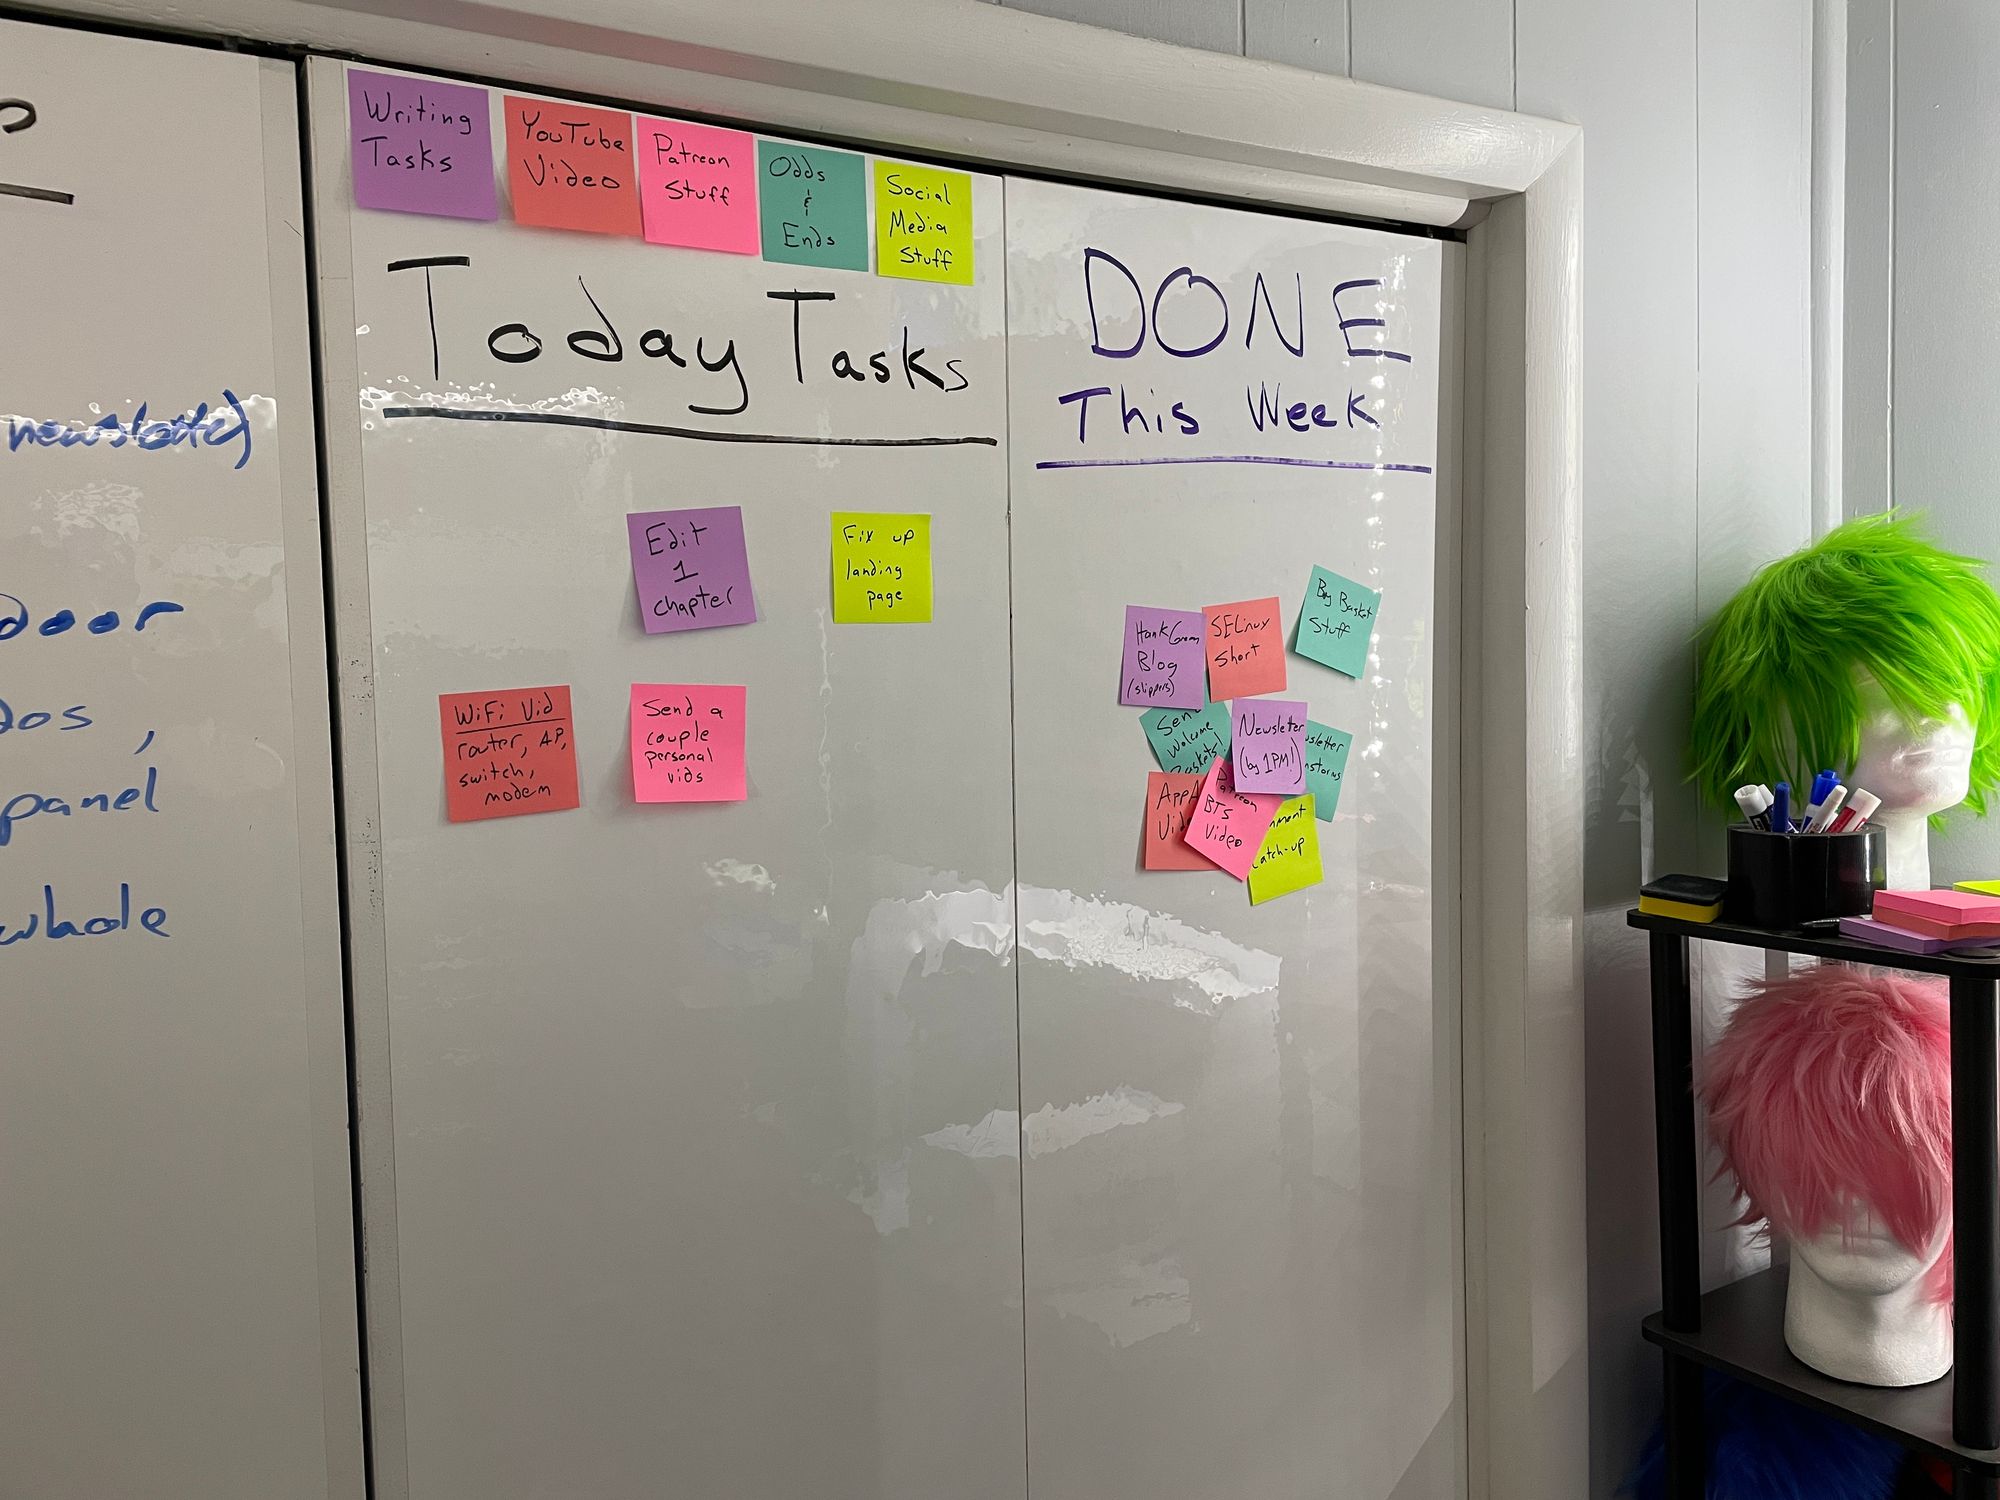 whiteboard with sticky notes all over, some done, some not done